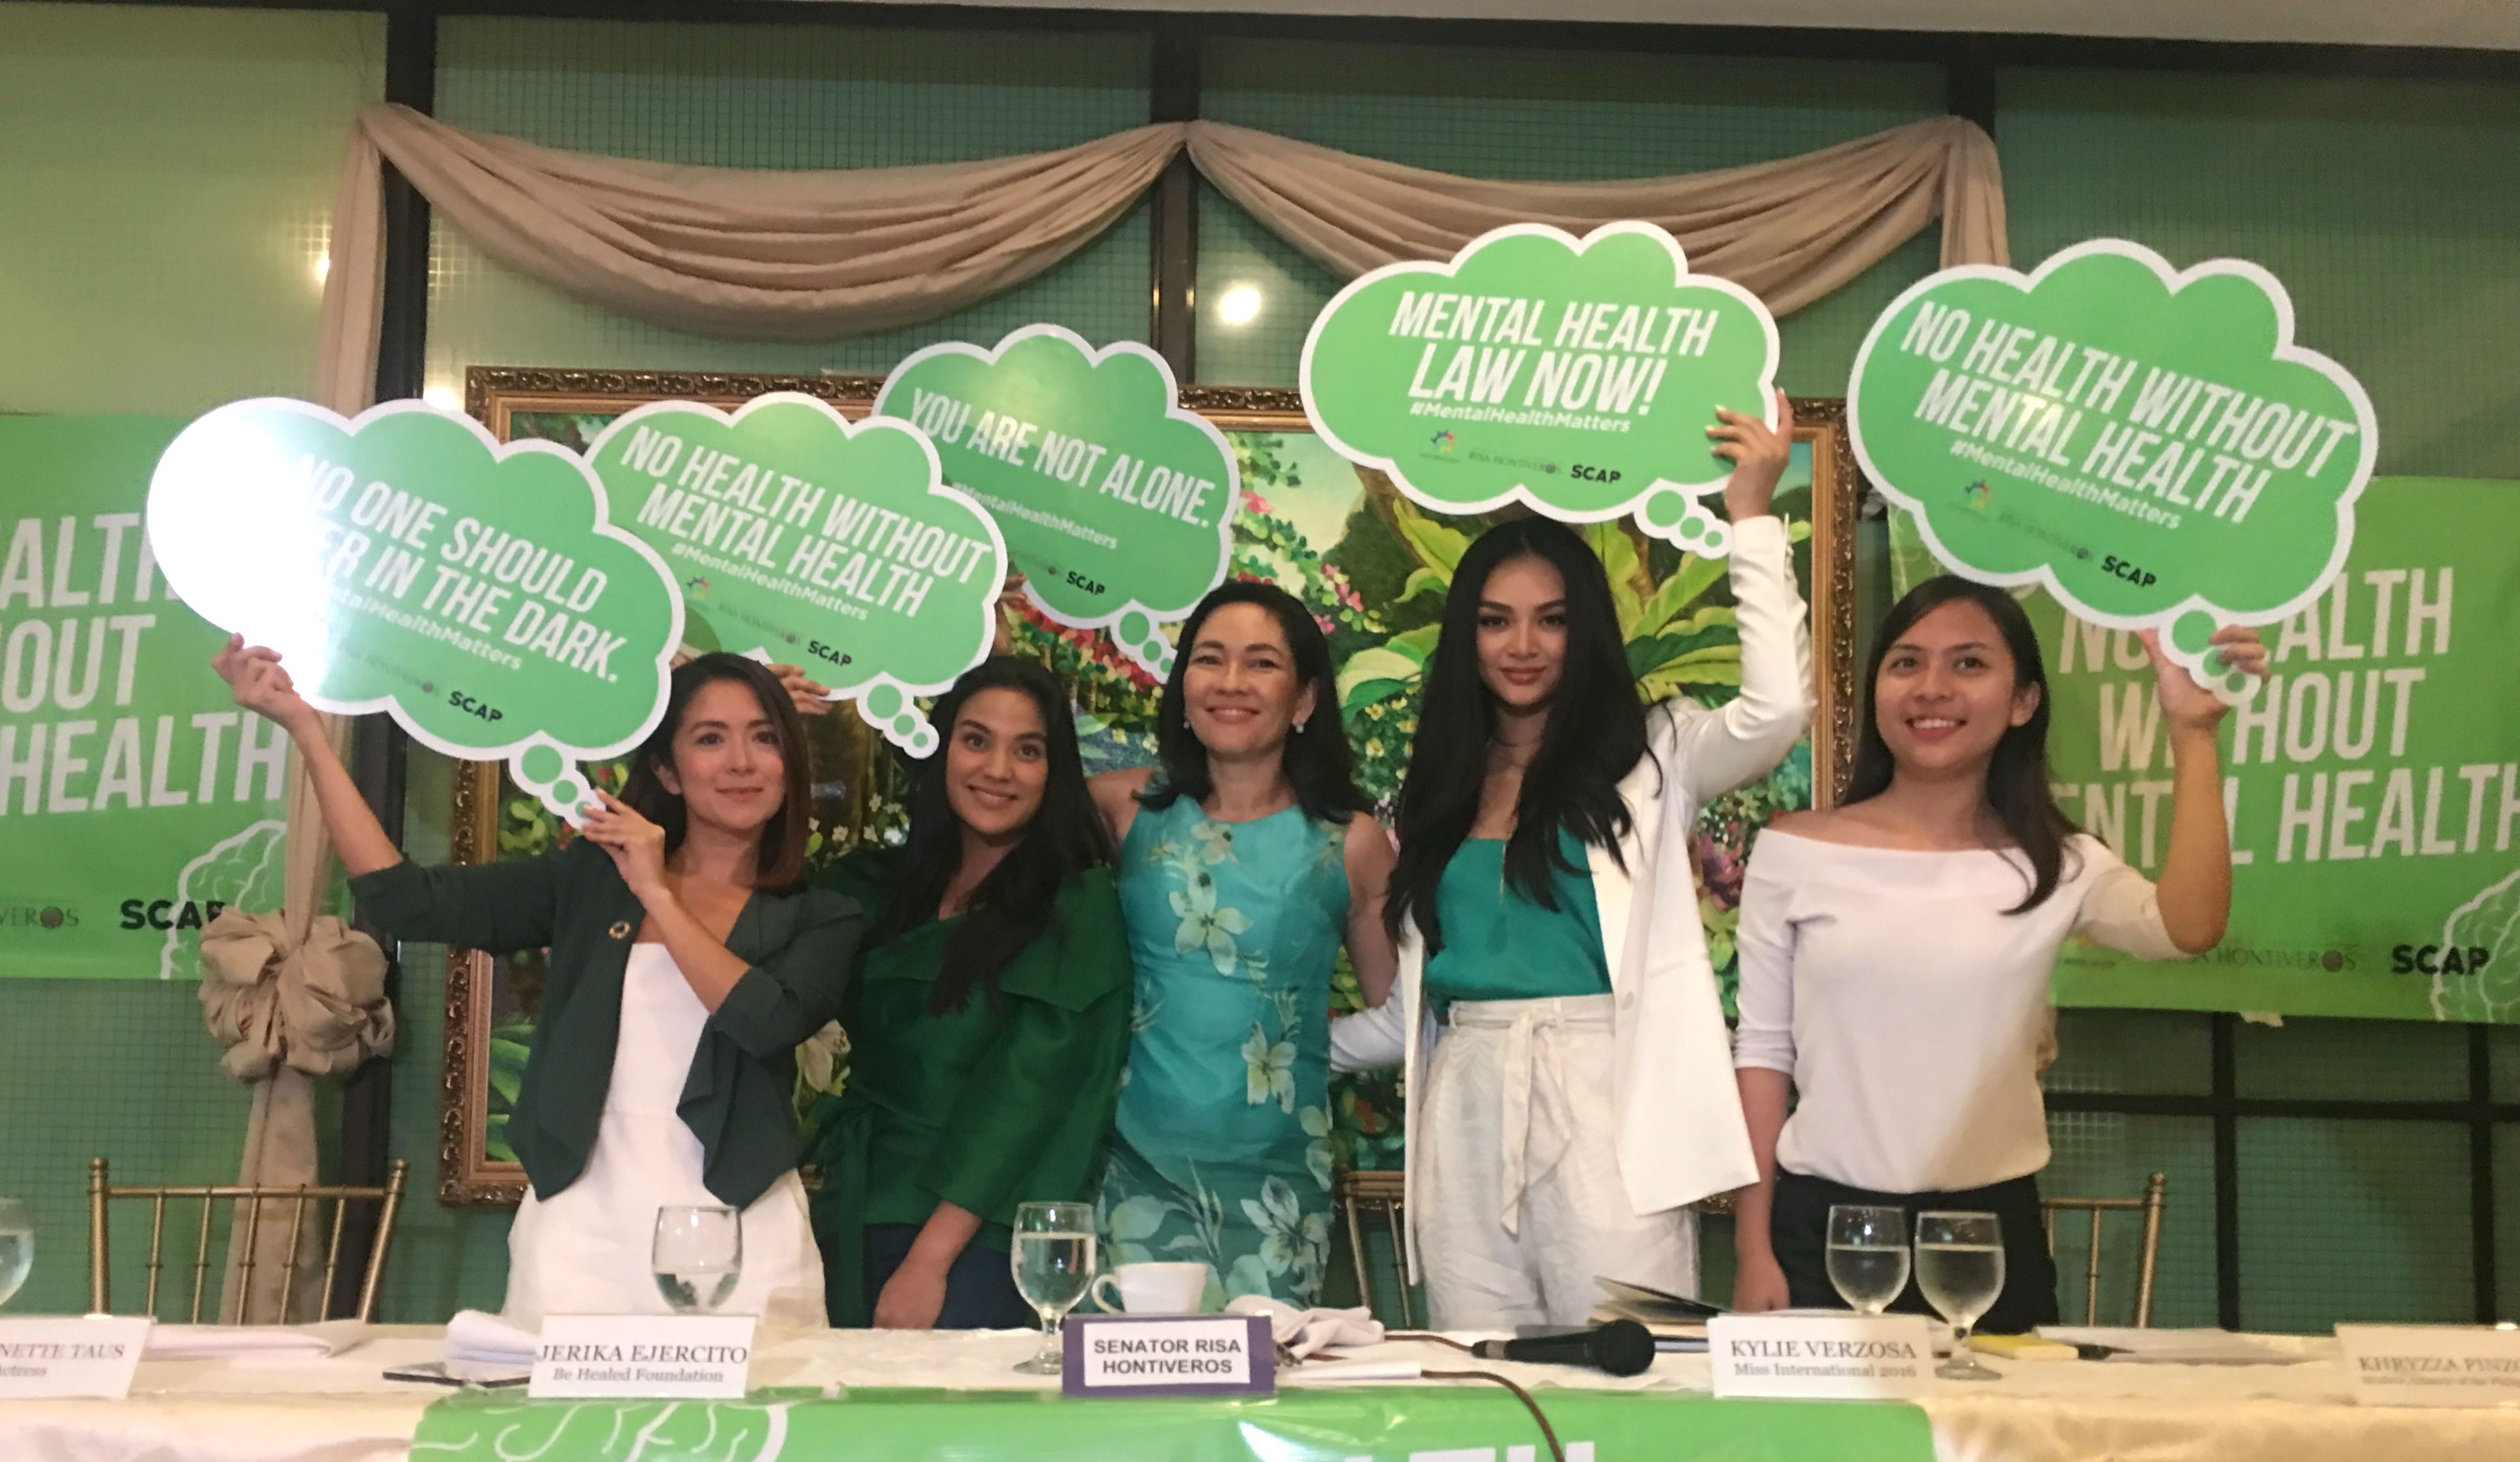 Left to right: Antoinette Taus, Be Healed Foundation’s Jerika Ejercito, senator Risa Hontiveros, Miss International 2016 Kylie Verzosa and Student Council Alliance of the Philippines’ Khryzza Pinzon. Photo courtesy of  Office of Senator Risa Hontiveros  